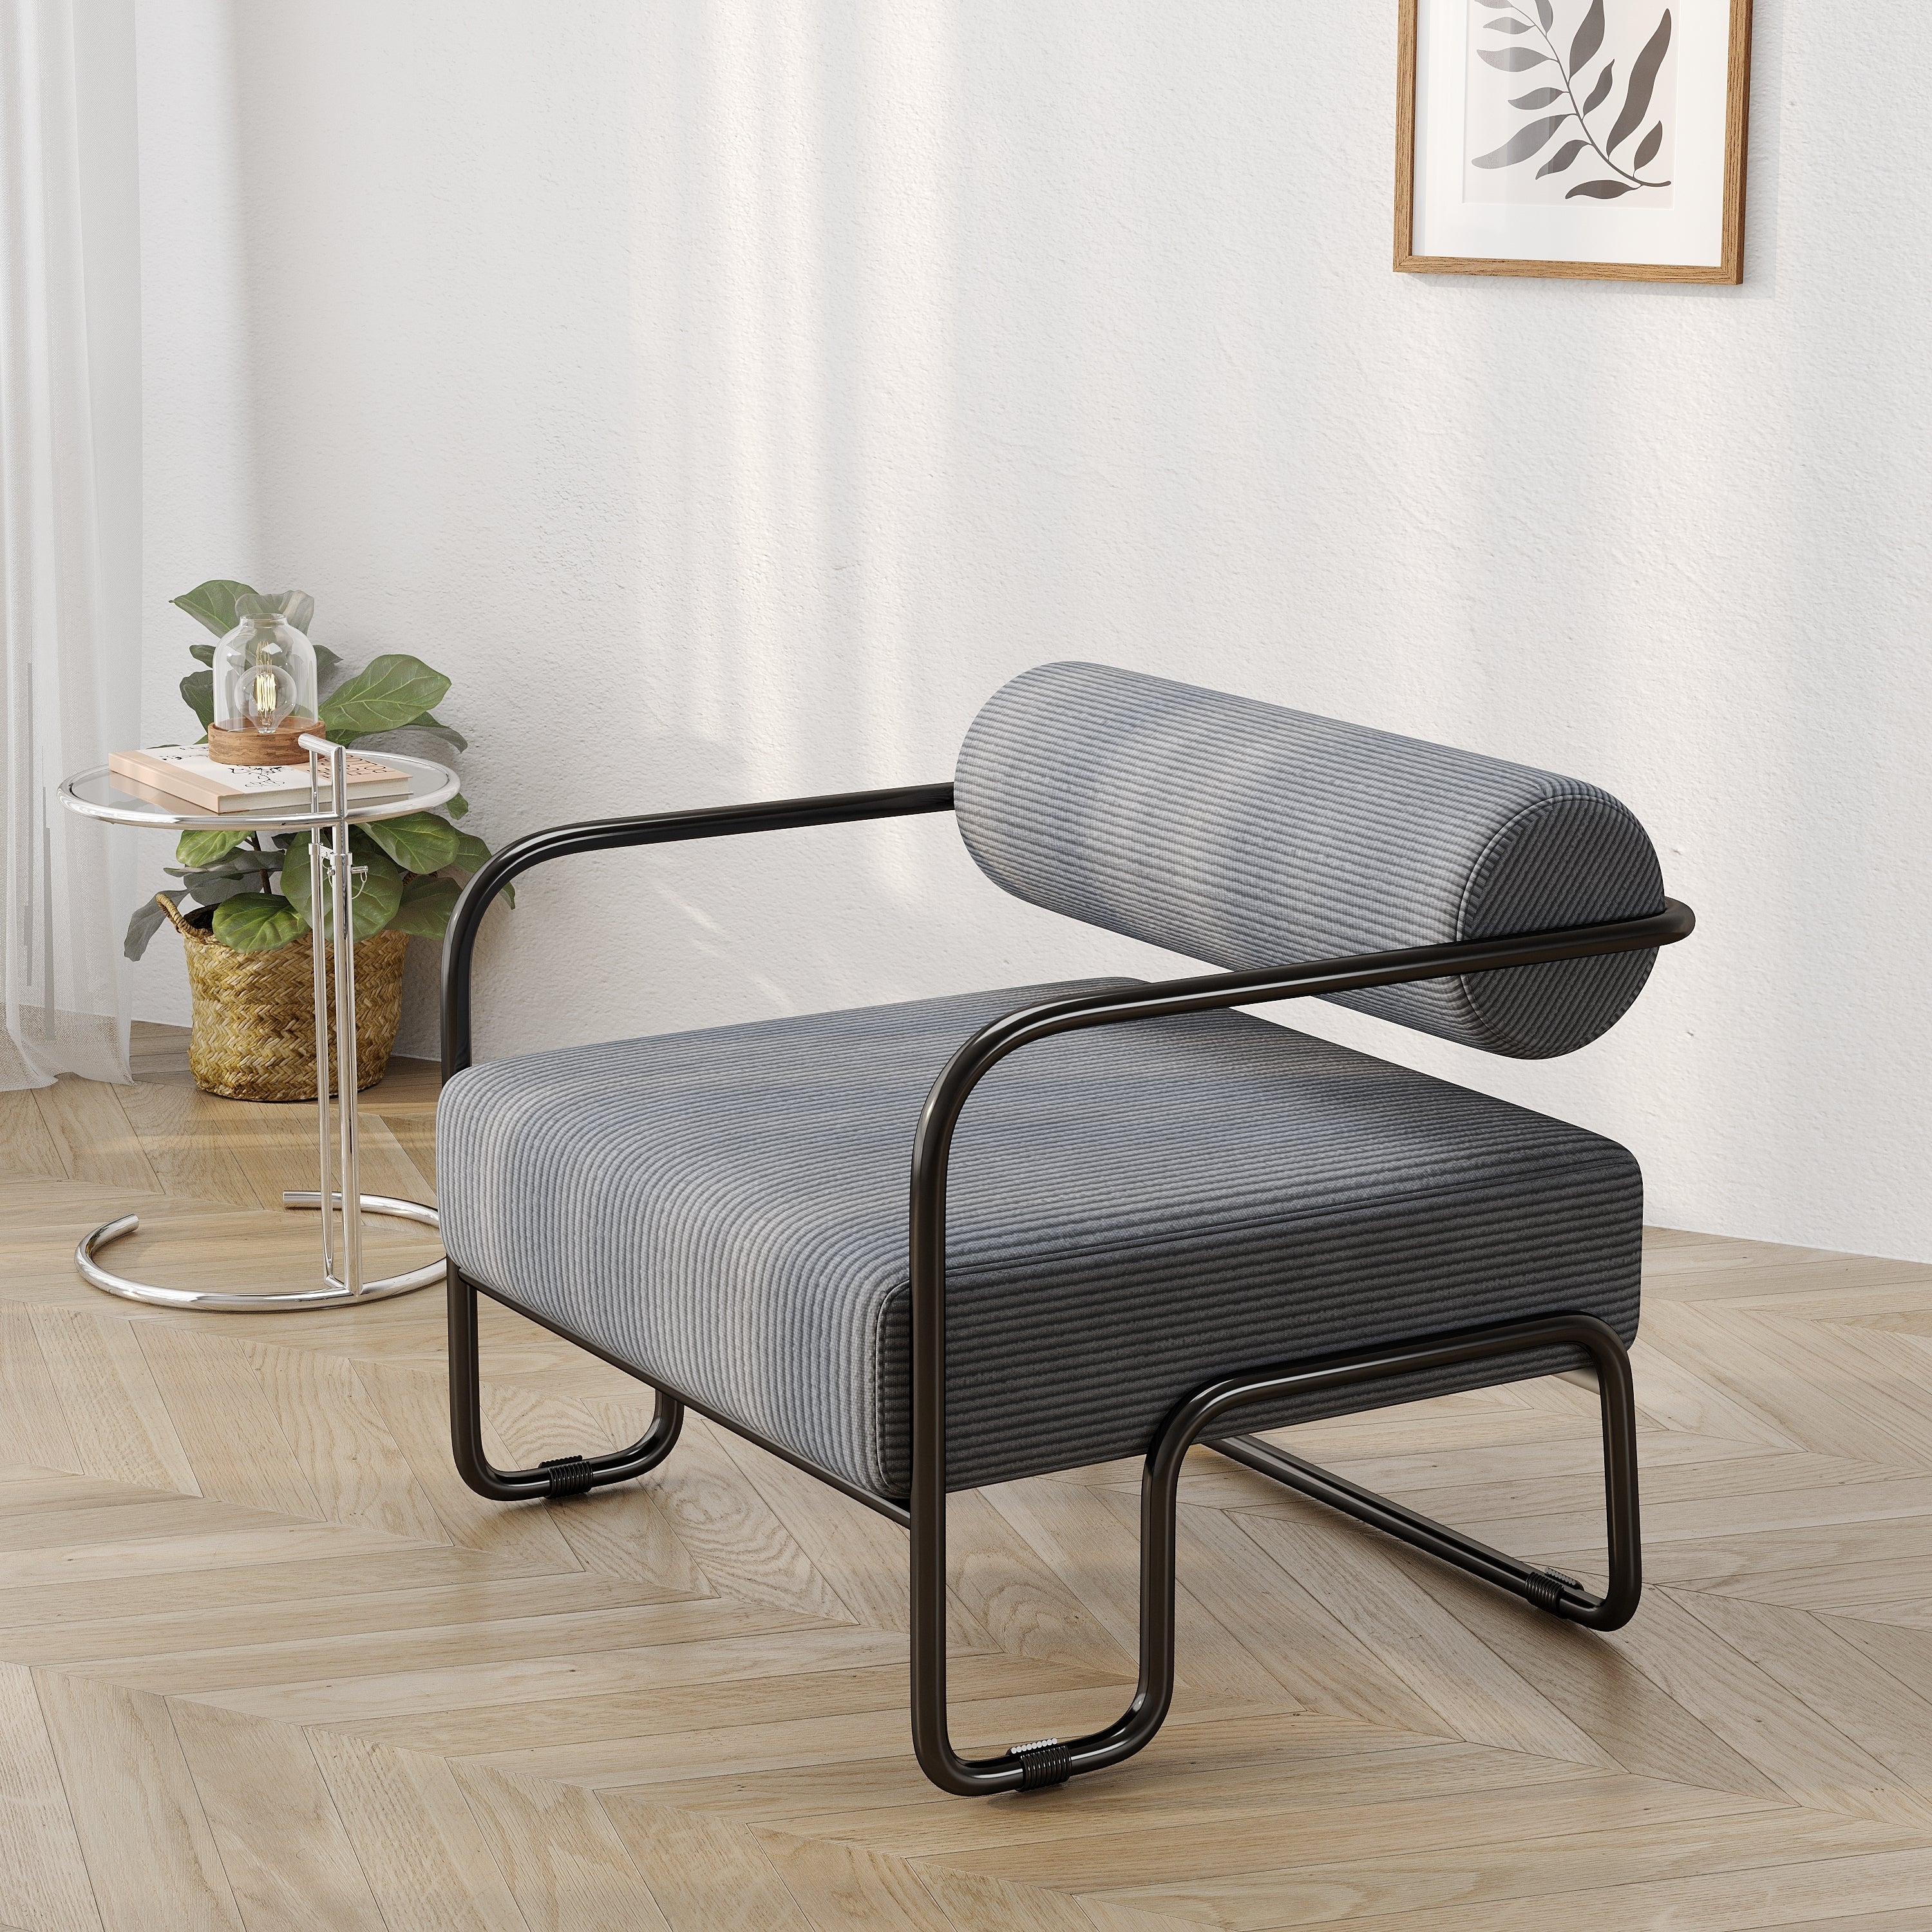 🆓🚛 Unique Design Living Room Iron Sofa Chair, Lazy Individual Chair, Balcony Leisure Chair, Gray